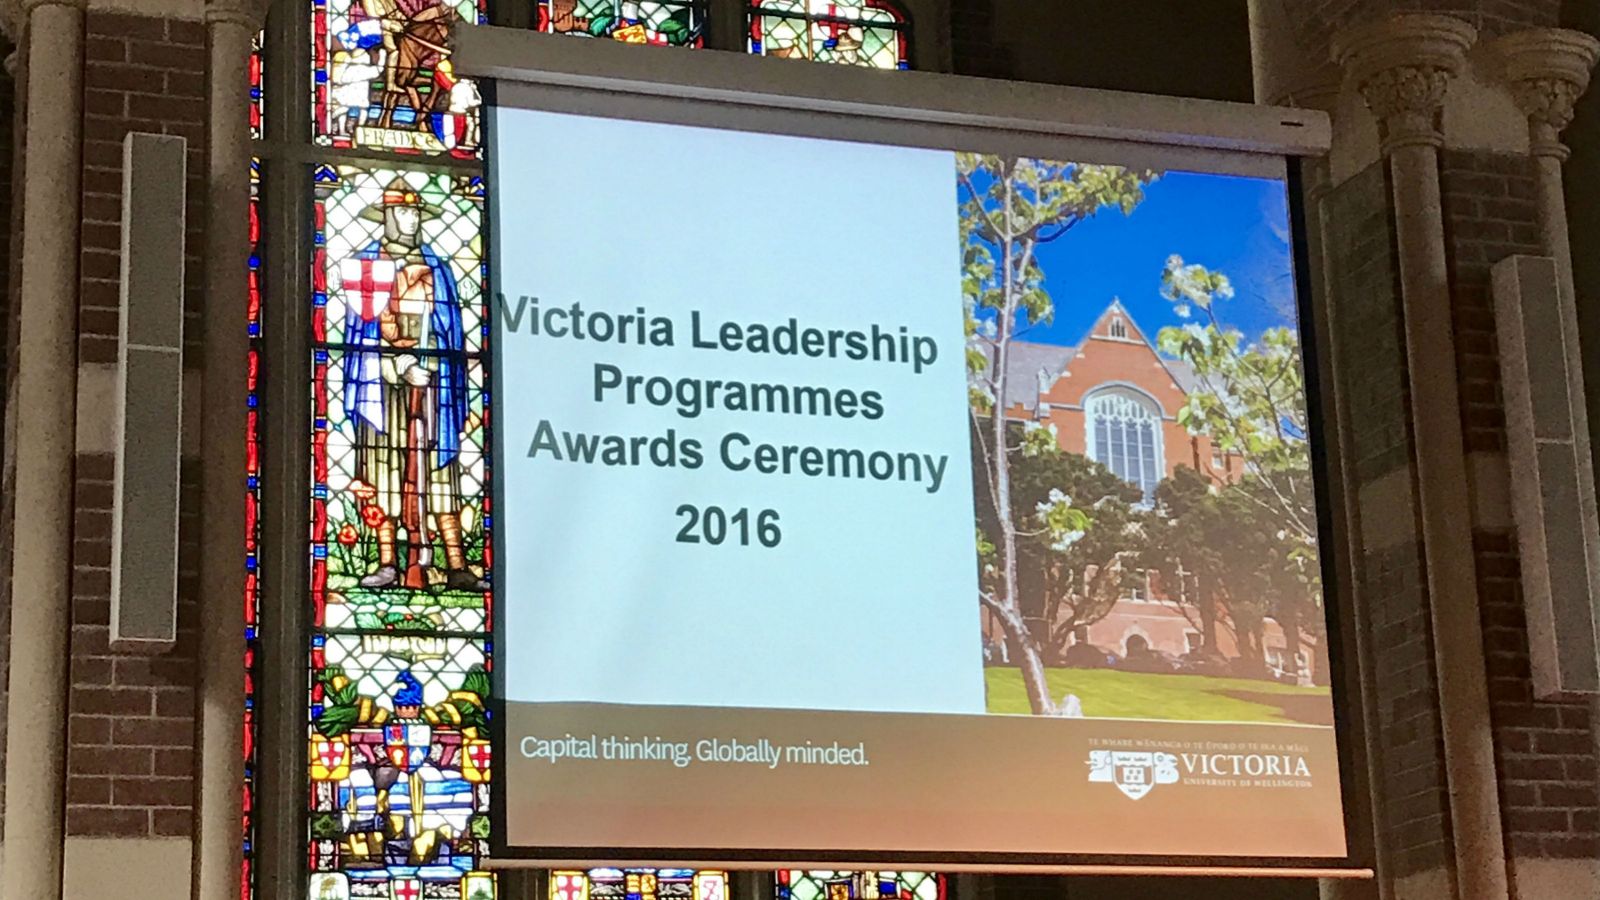 The banner of the Victoria International Leadership Awards 2016 against the backdrop of a beautiful stained-glass window.